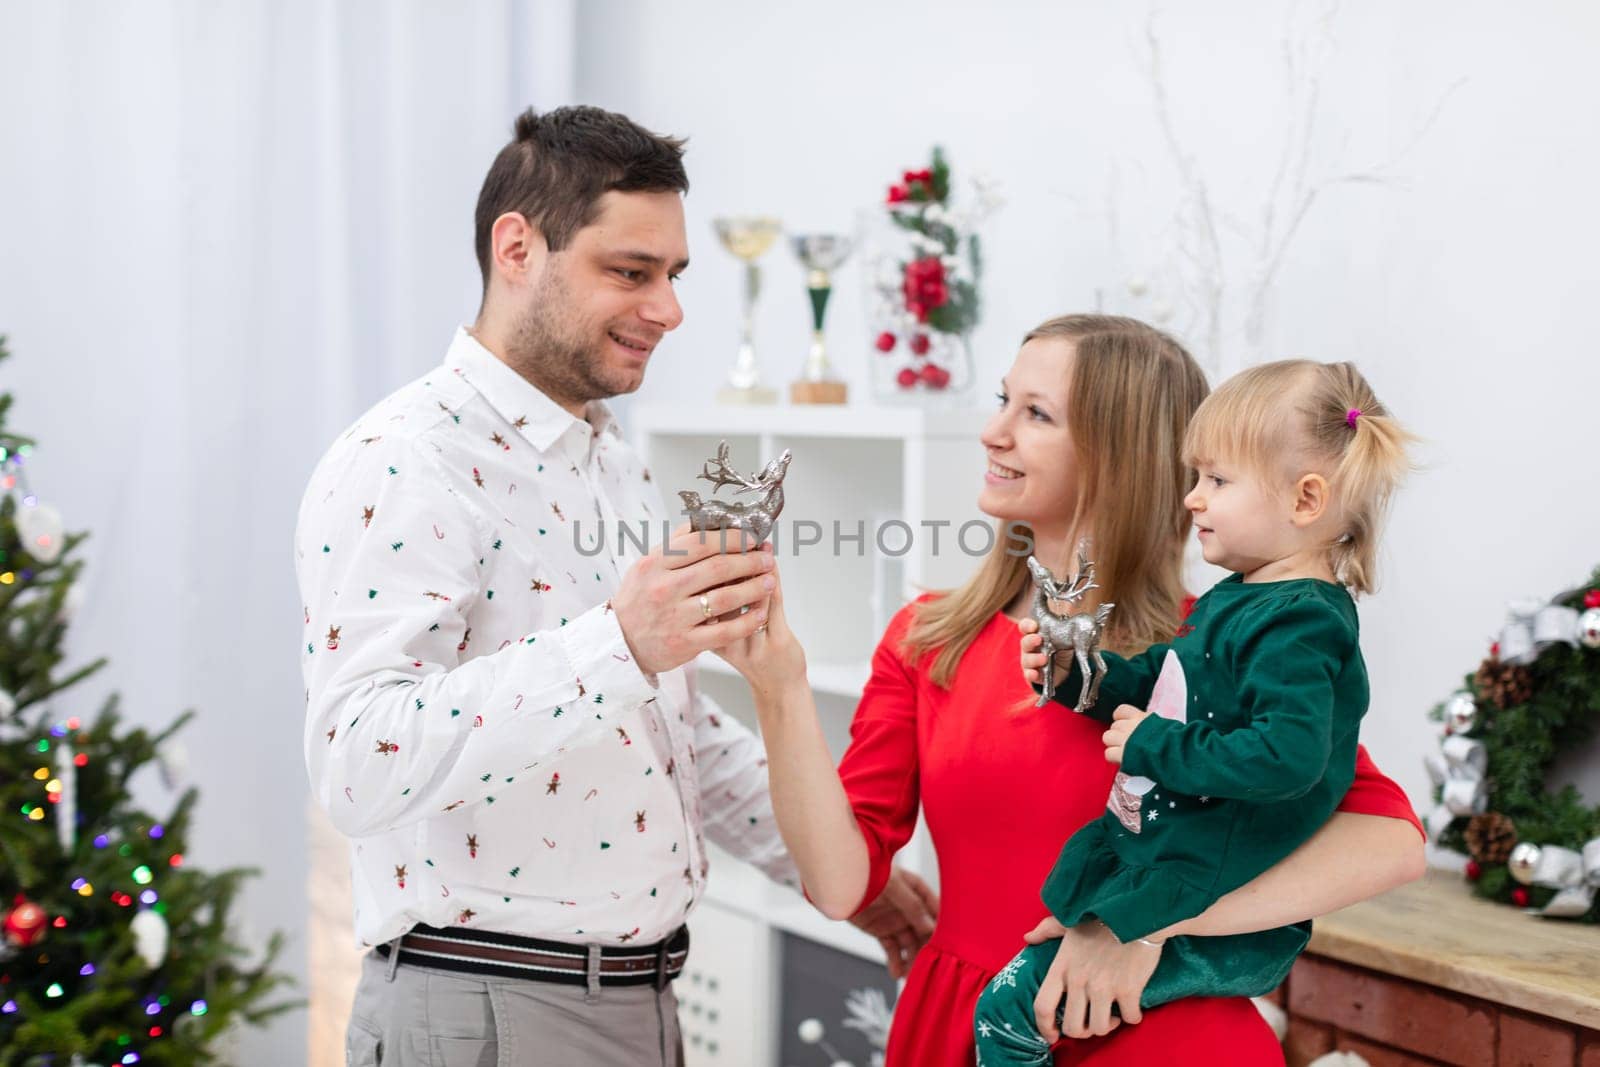 A man, a woman and a little girl stand by a brick fireplace. The fireplace is decorated with Christmas decorations. The woman holds a little girl in her arms. The daughter and father are holding silver Christmas decorations in their hands.